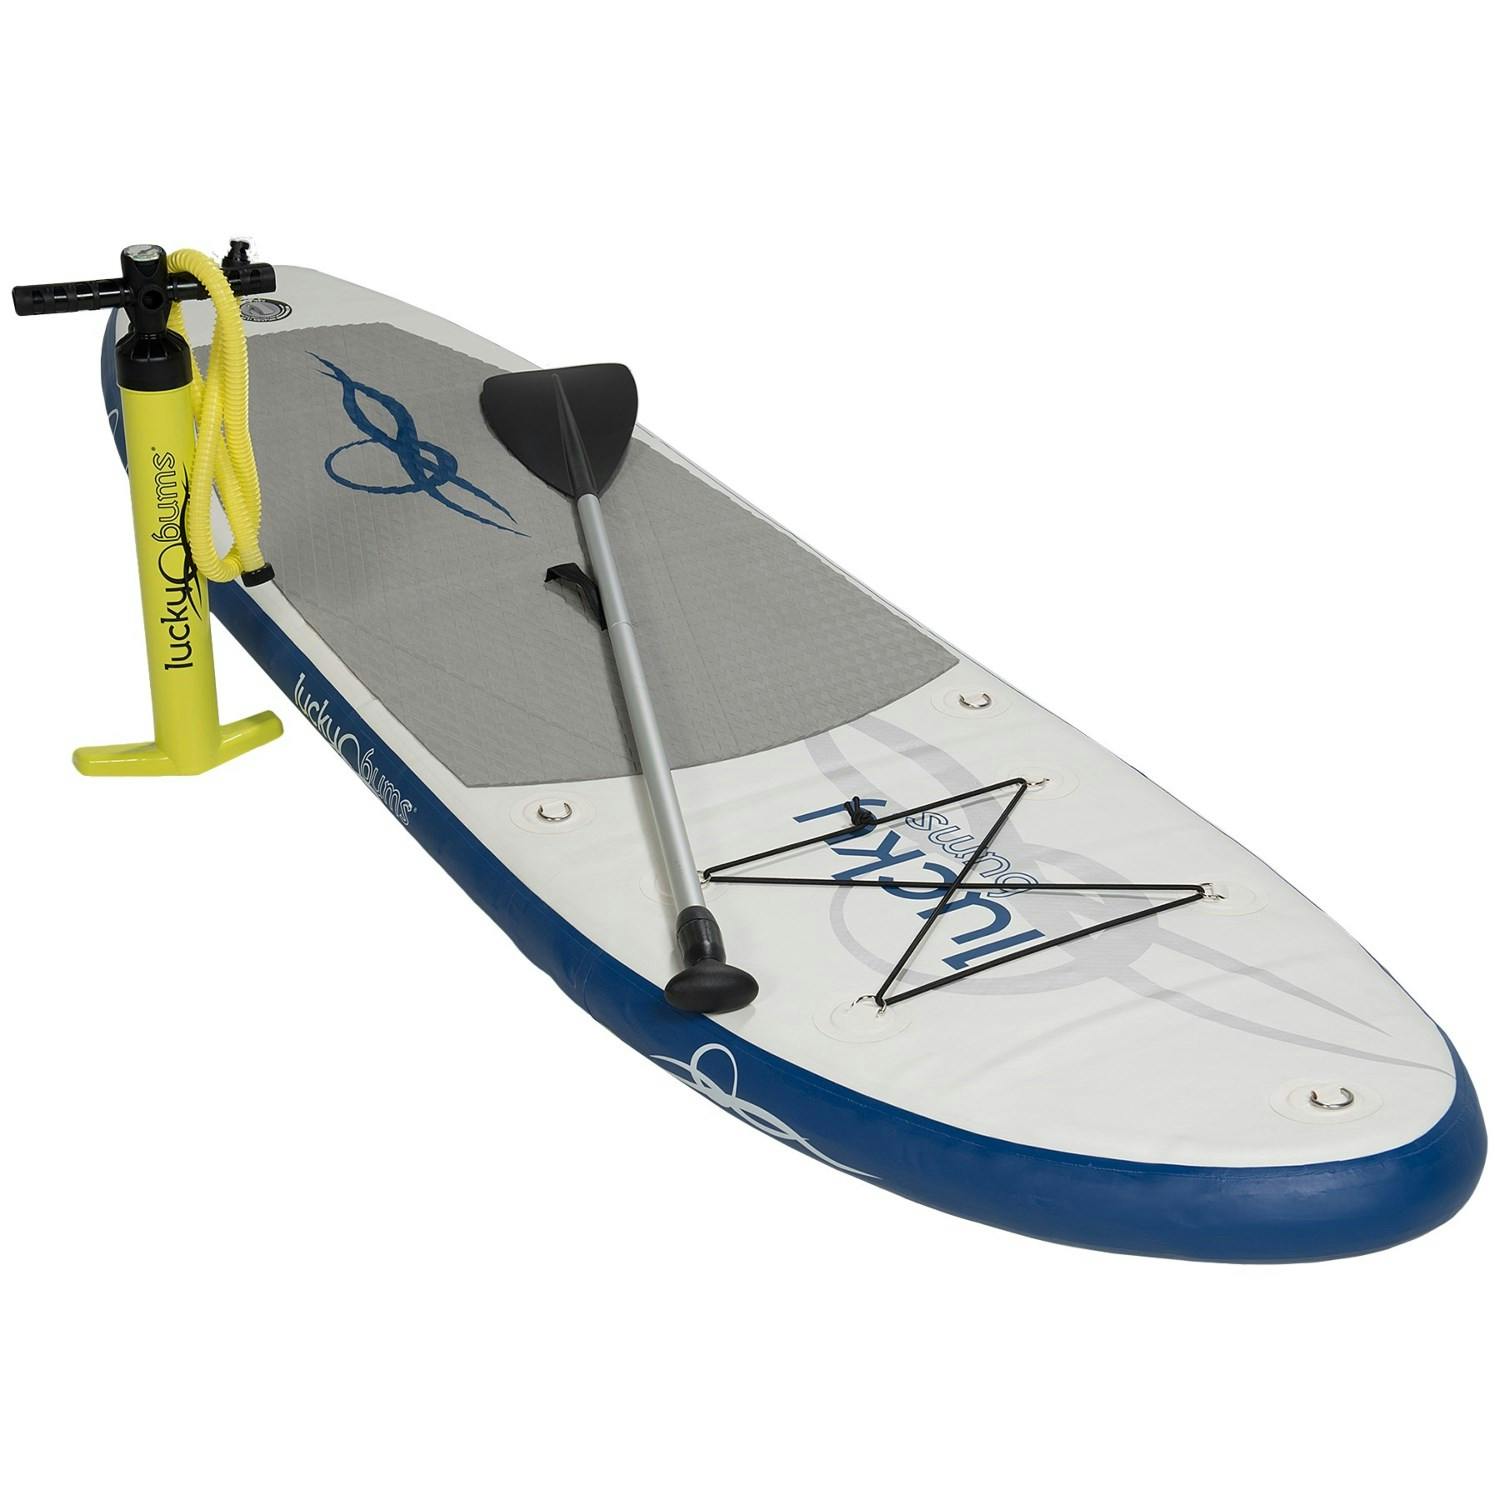 https://activejunky-cdn.s3.amazonaws.com/aj-content/lucky-bums-7-inflatable-stand-up-paddle-board-kit-7_a_249vm_4_1500.1.jpg